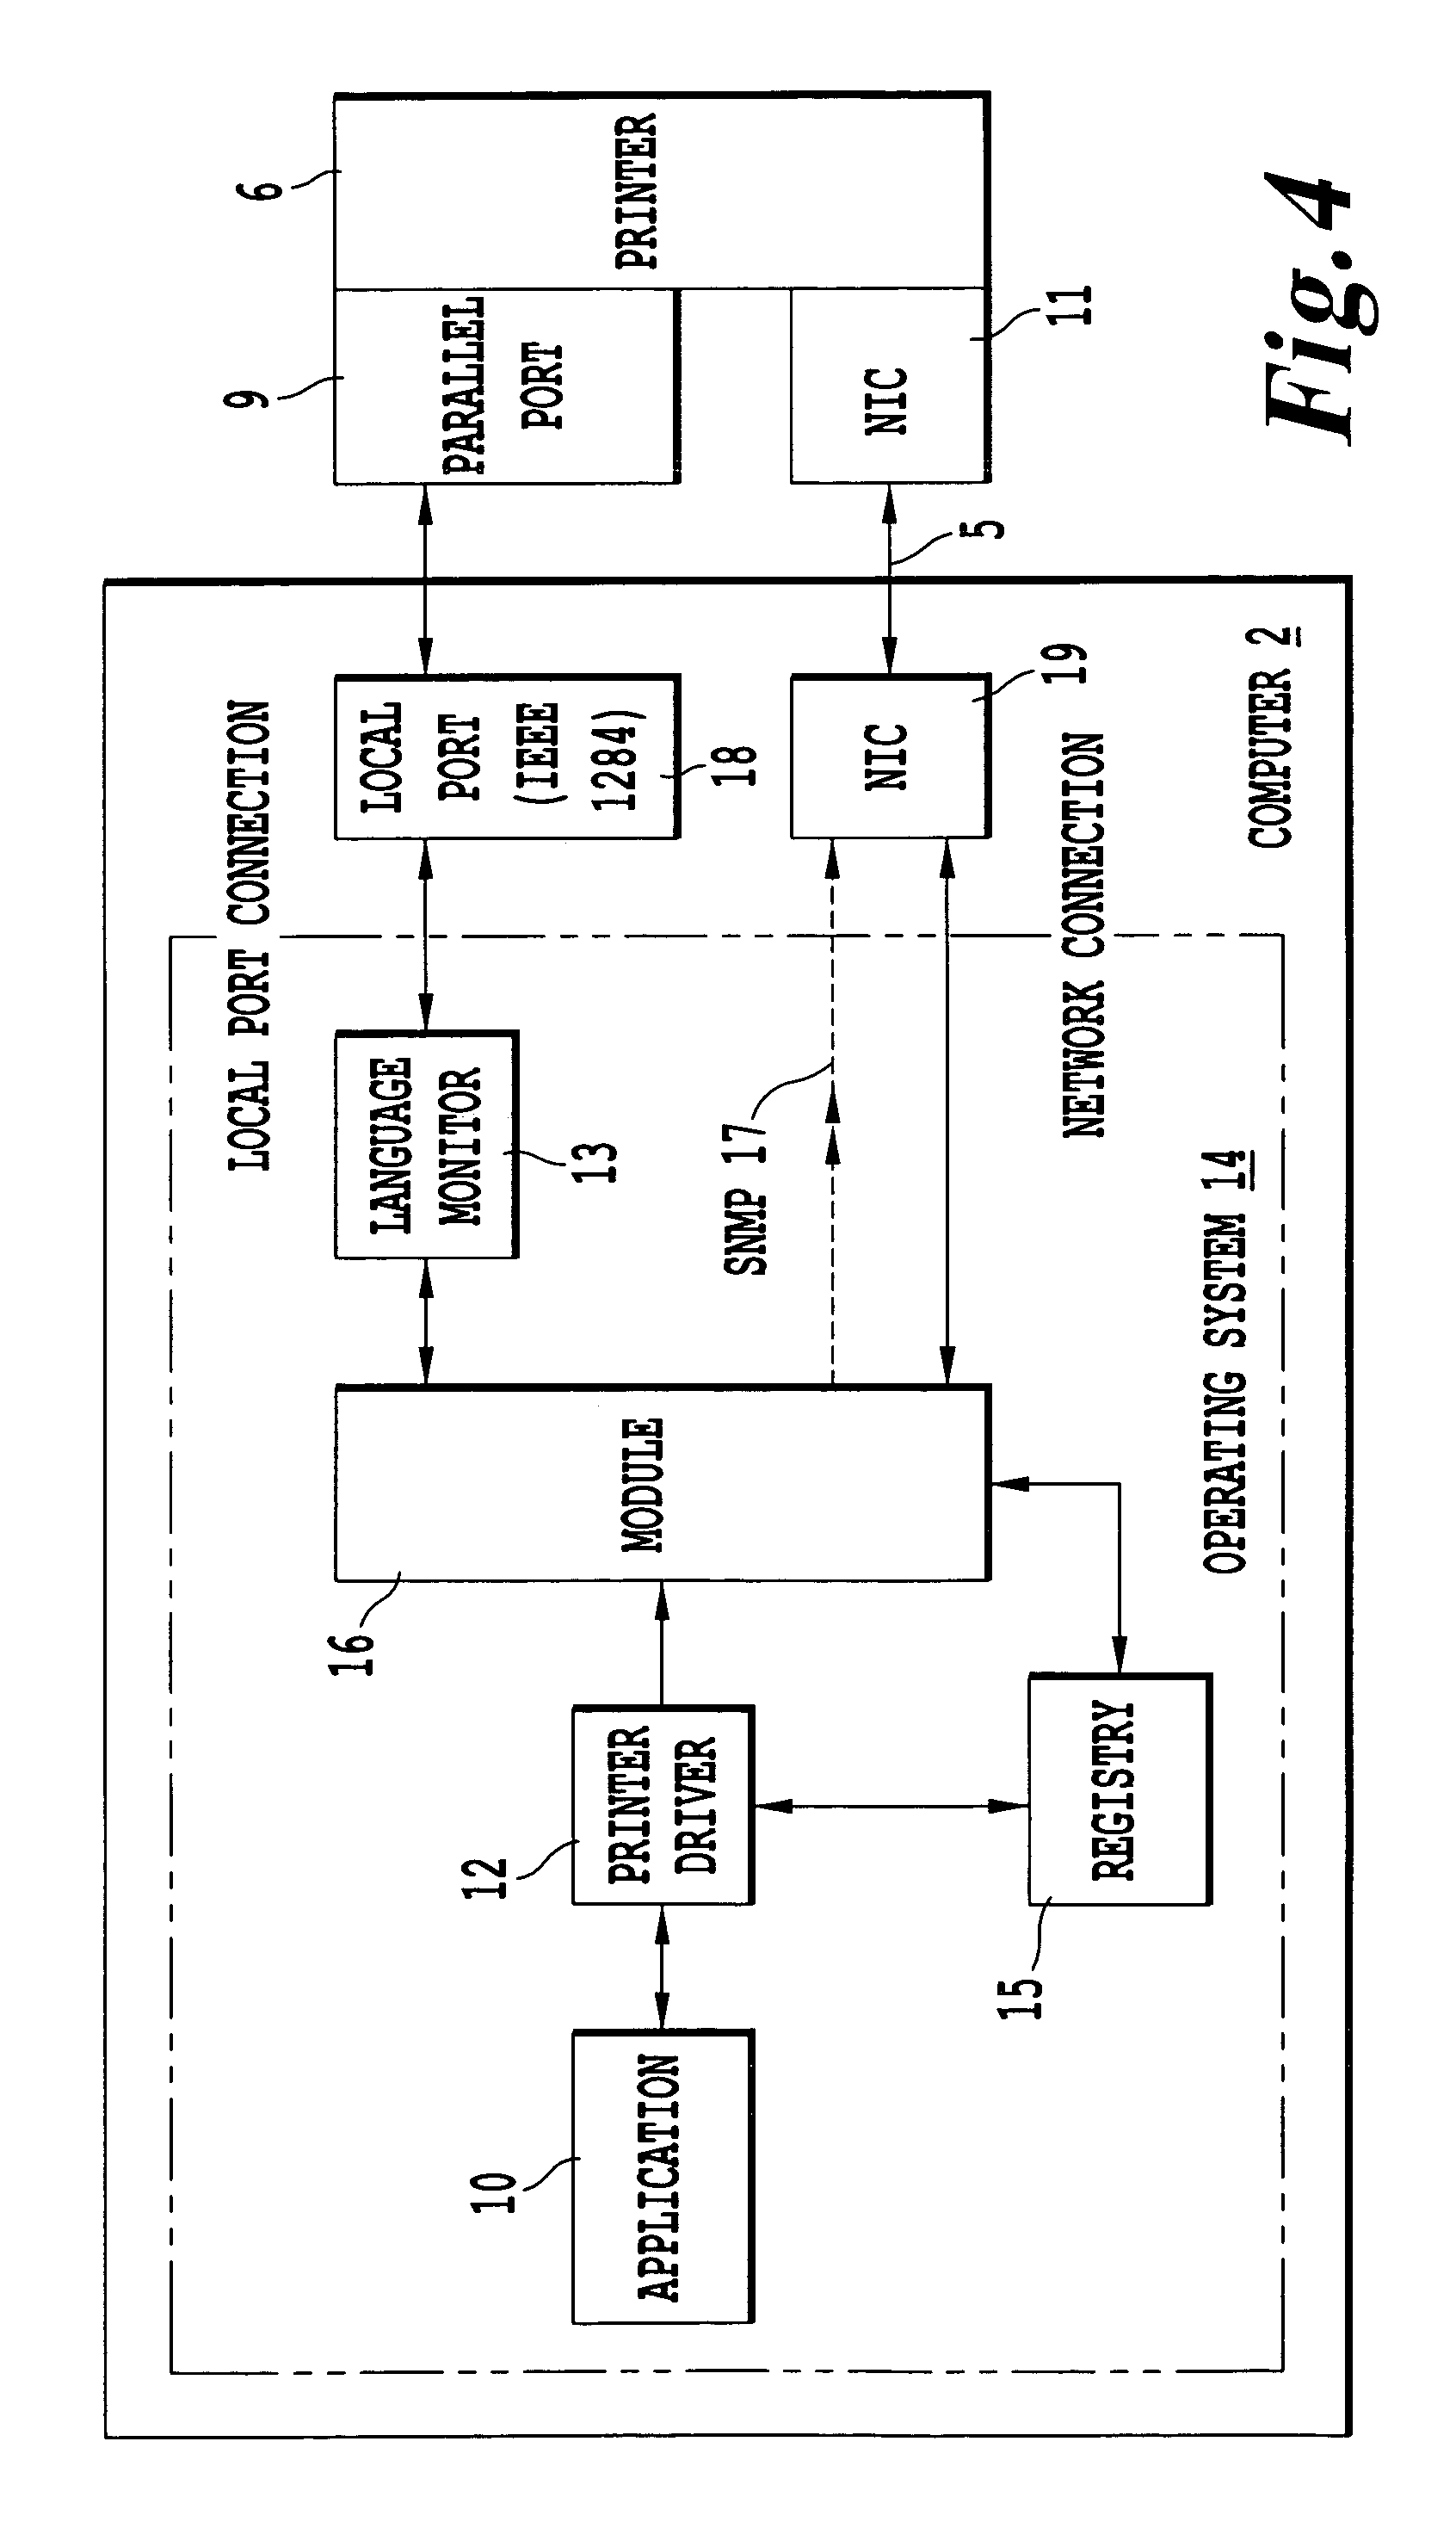 Method of configuring a computer to include the available options of a printer